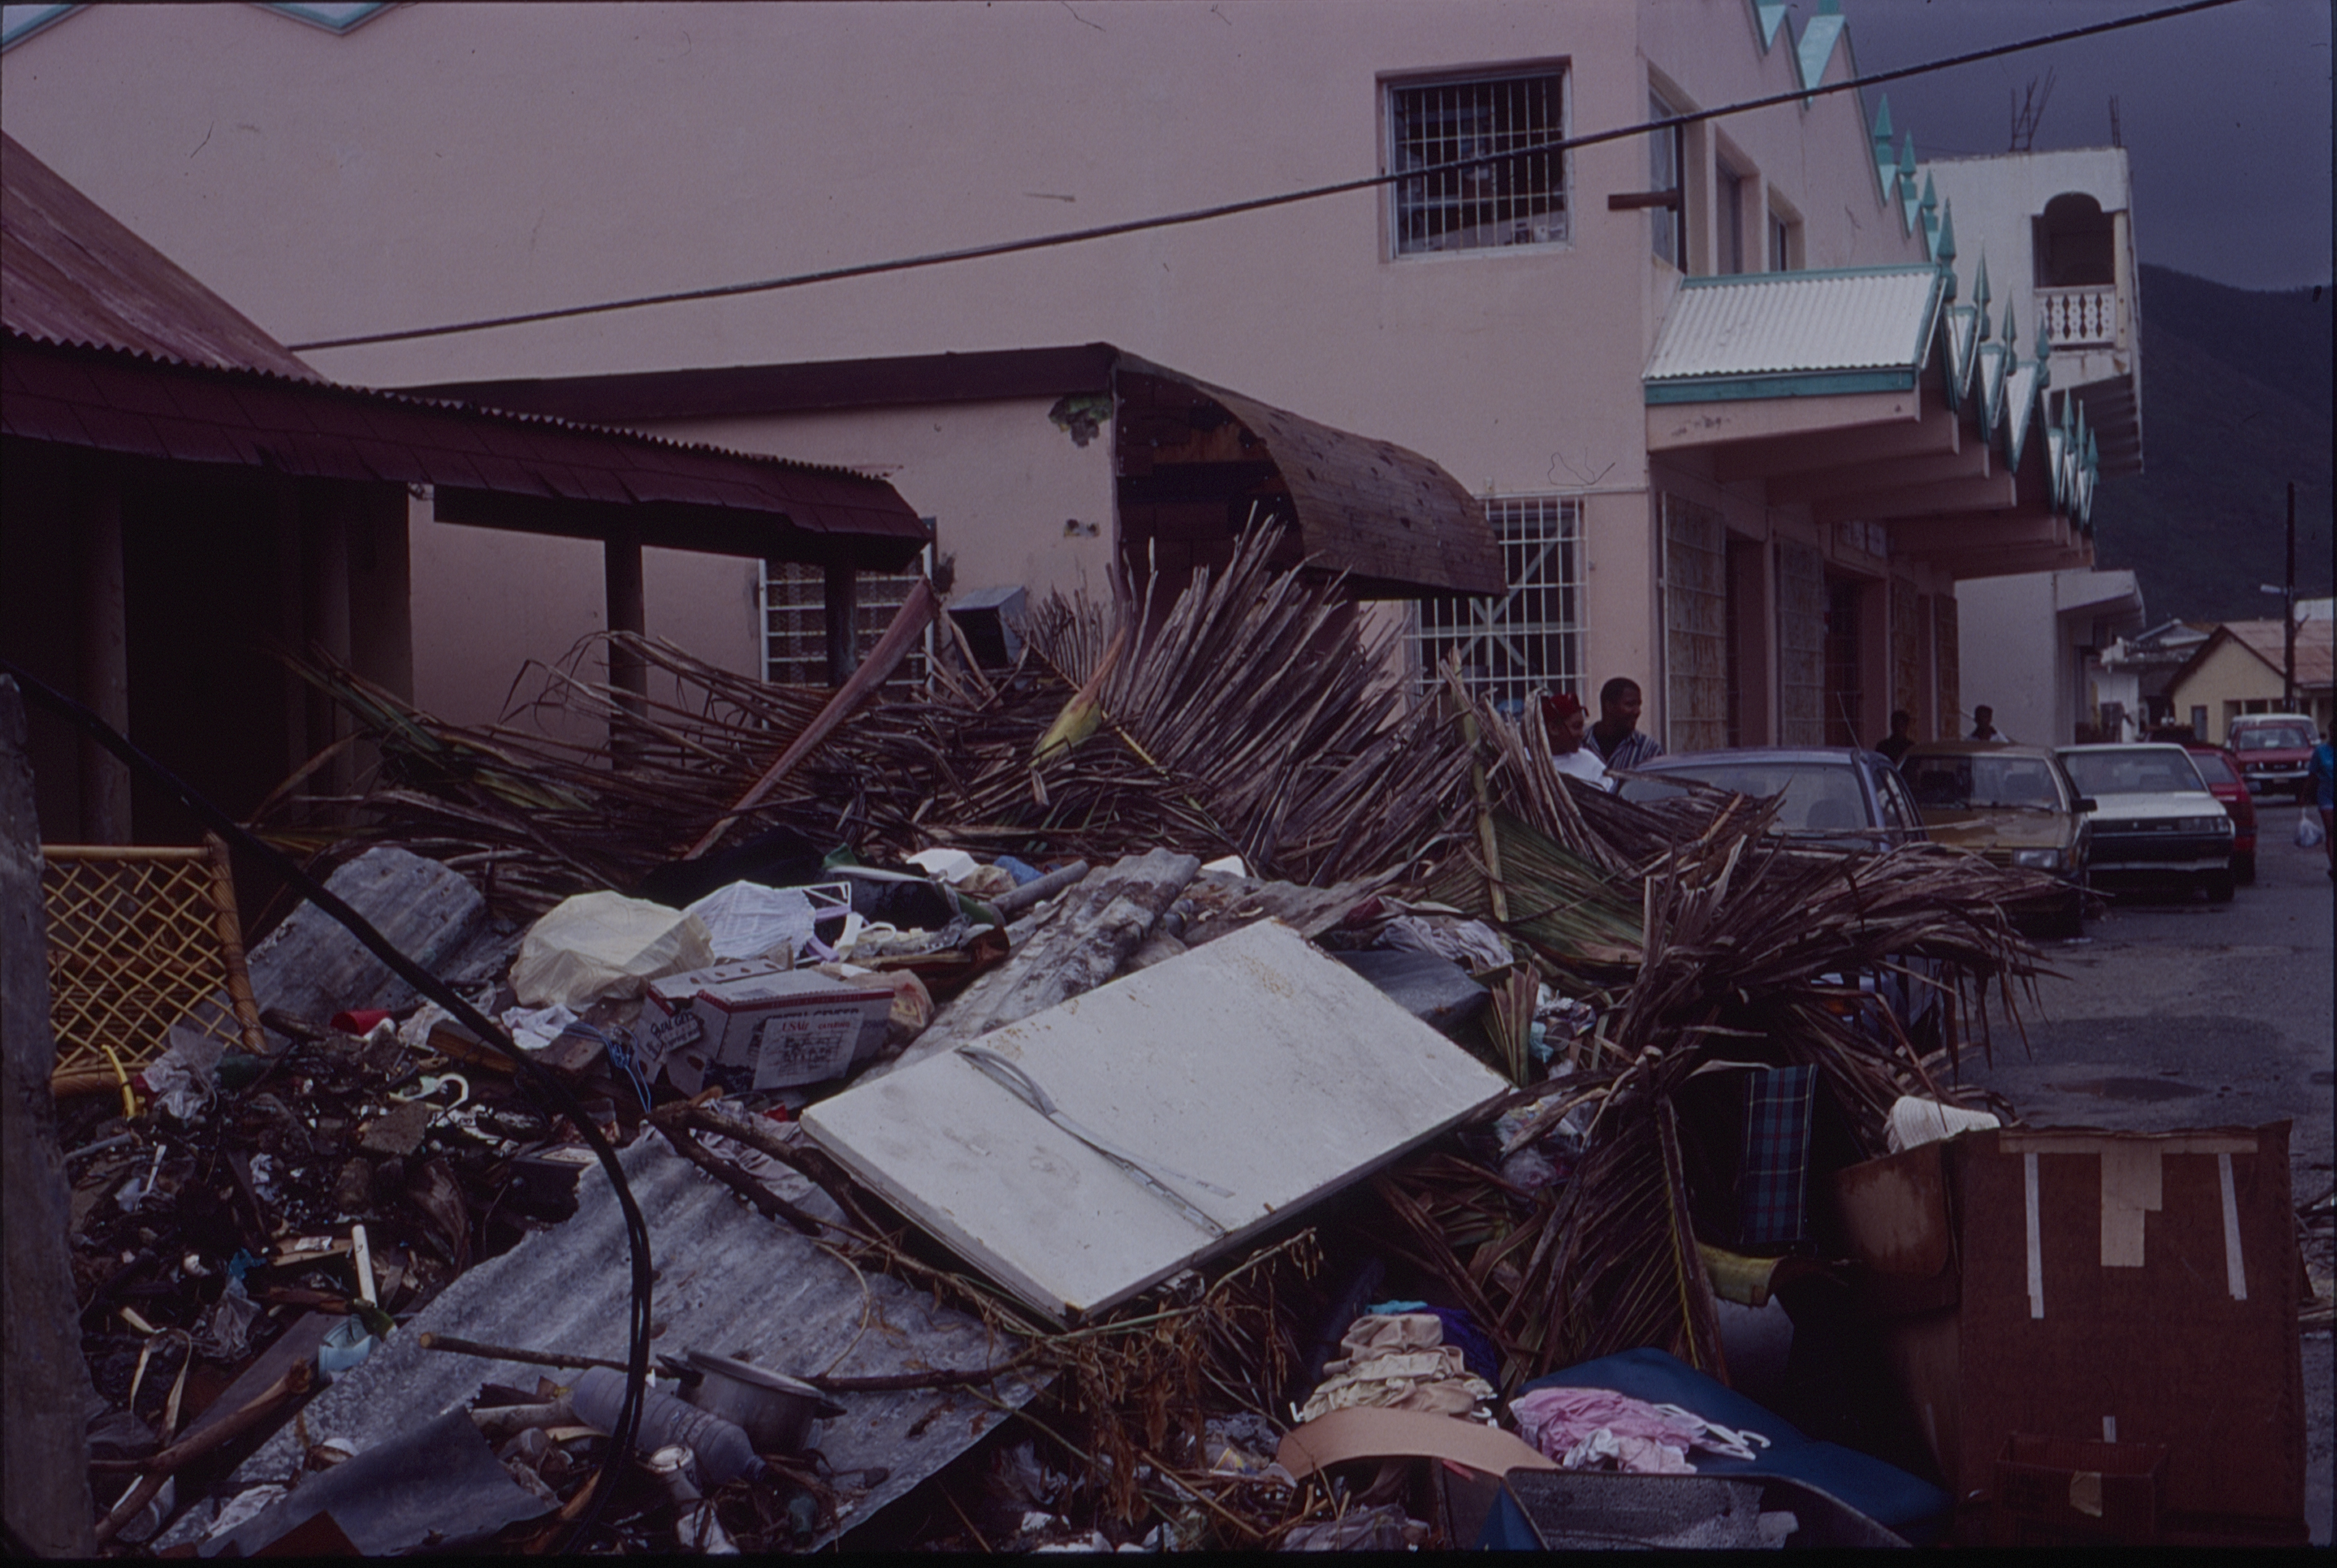 A photo of destruction after Hurricane during cleaning day in Marigot.